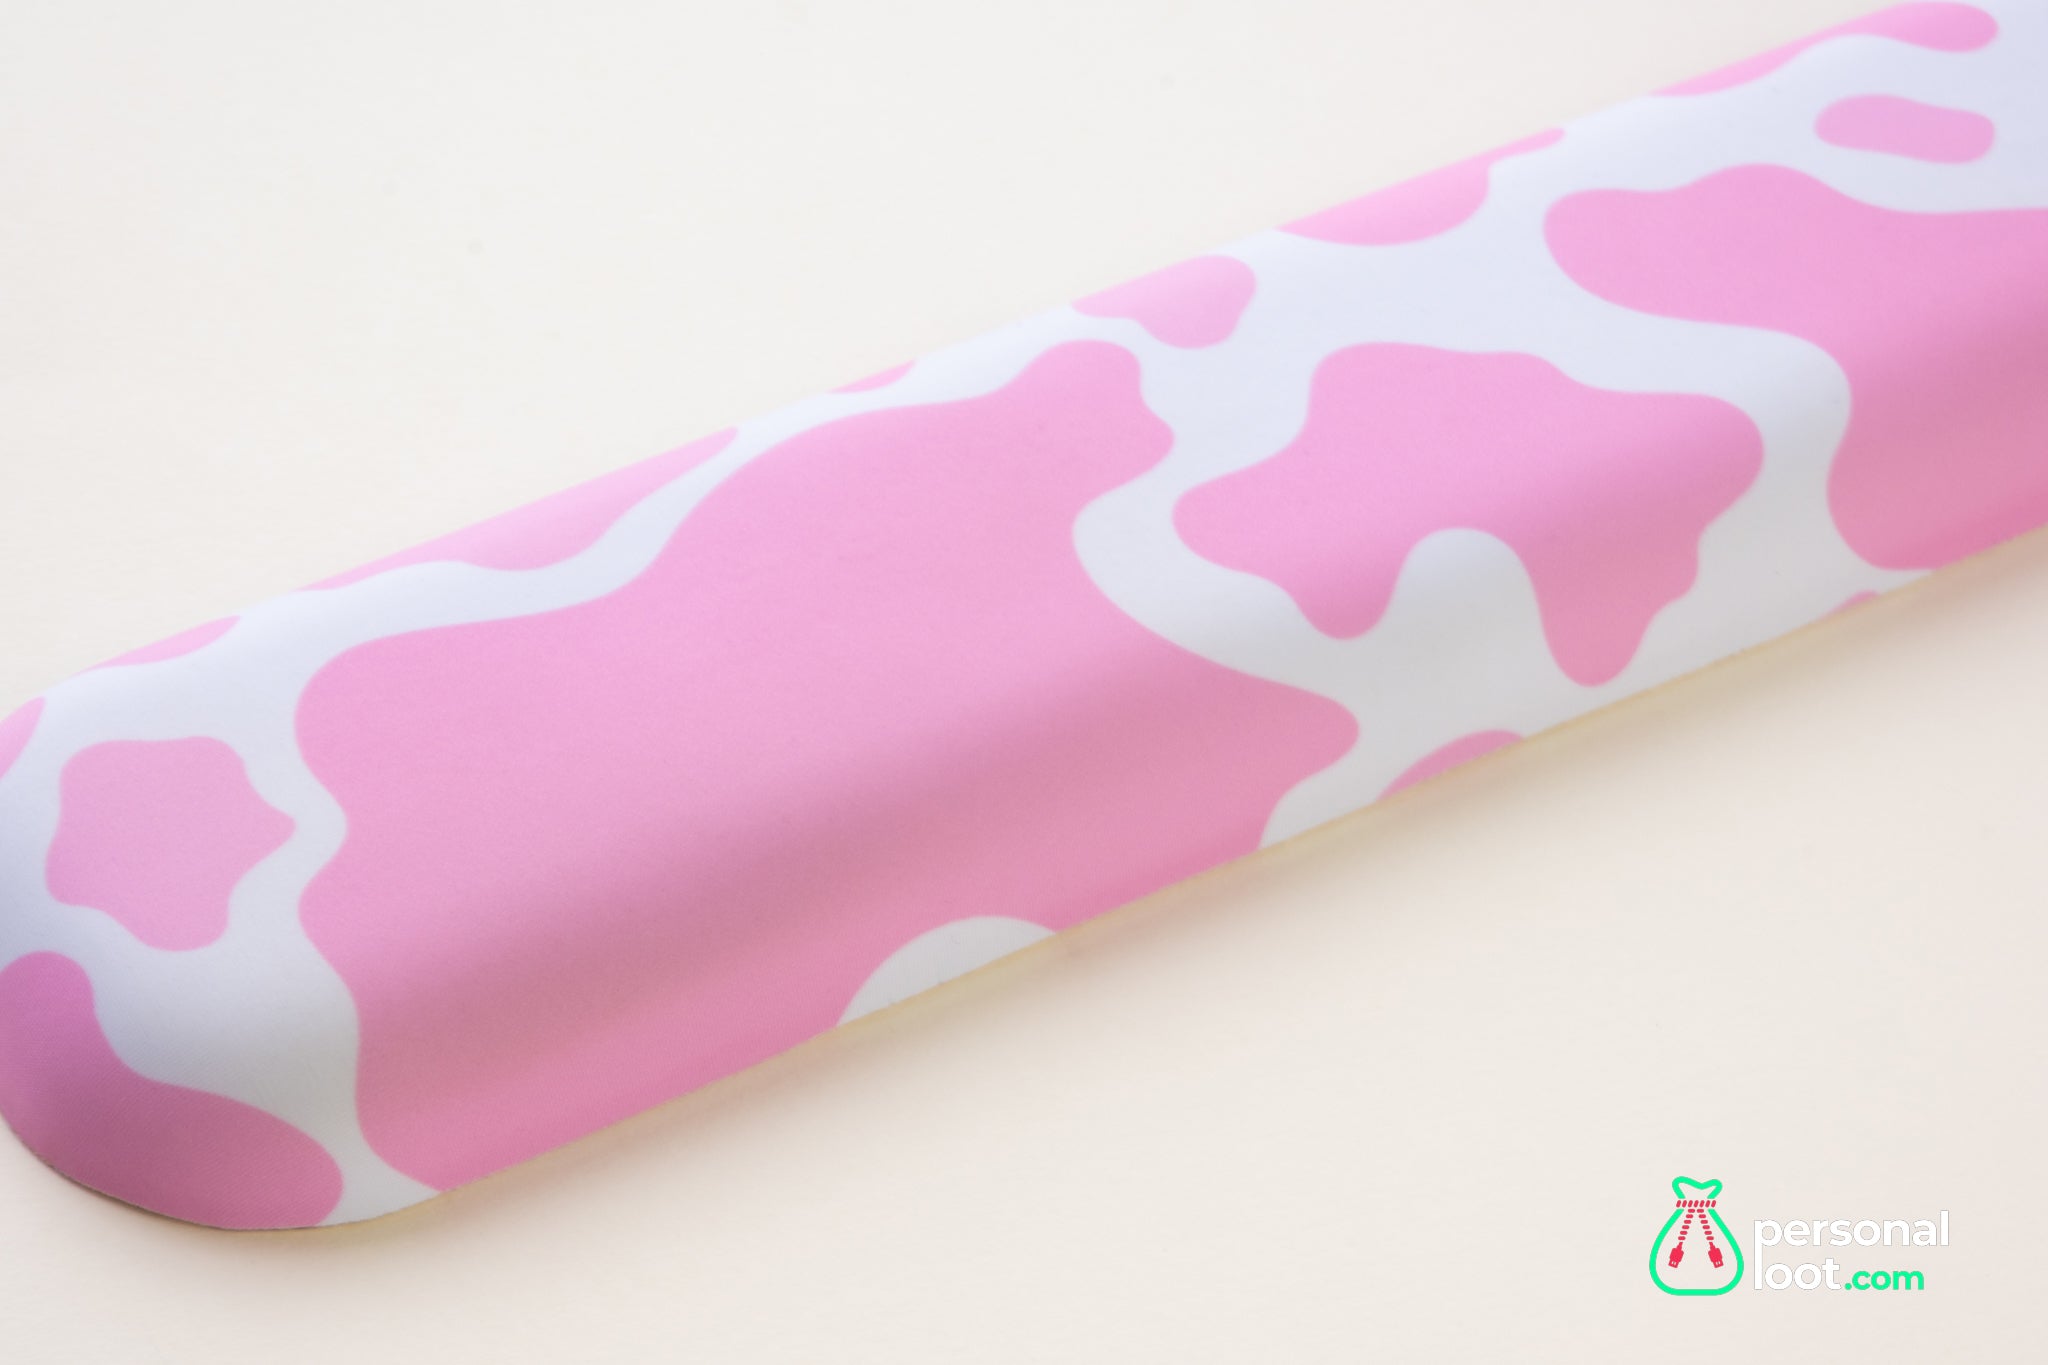 Strawberry Cow Wrist Rest - IN STOCK